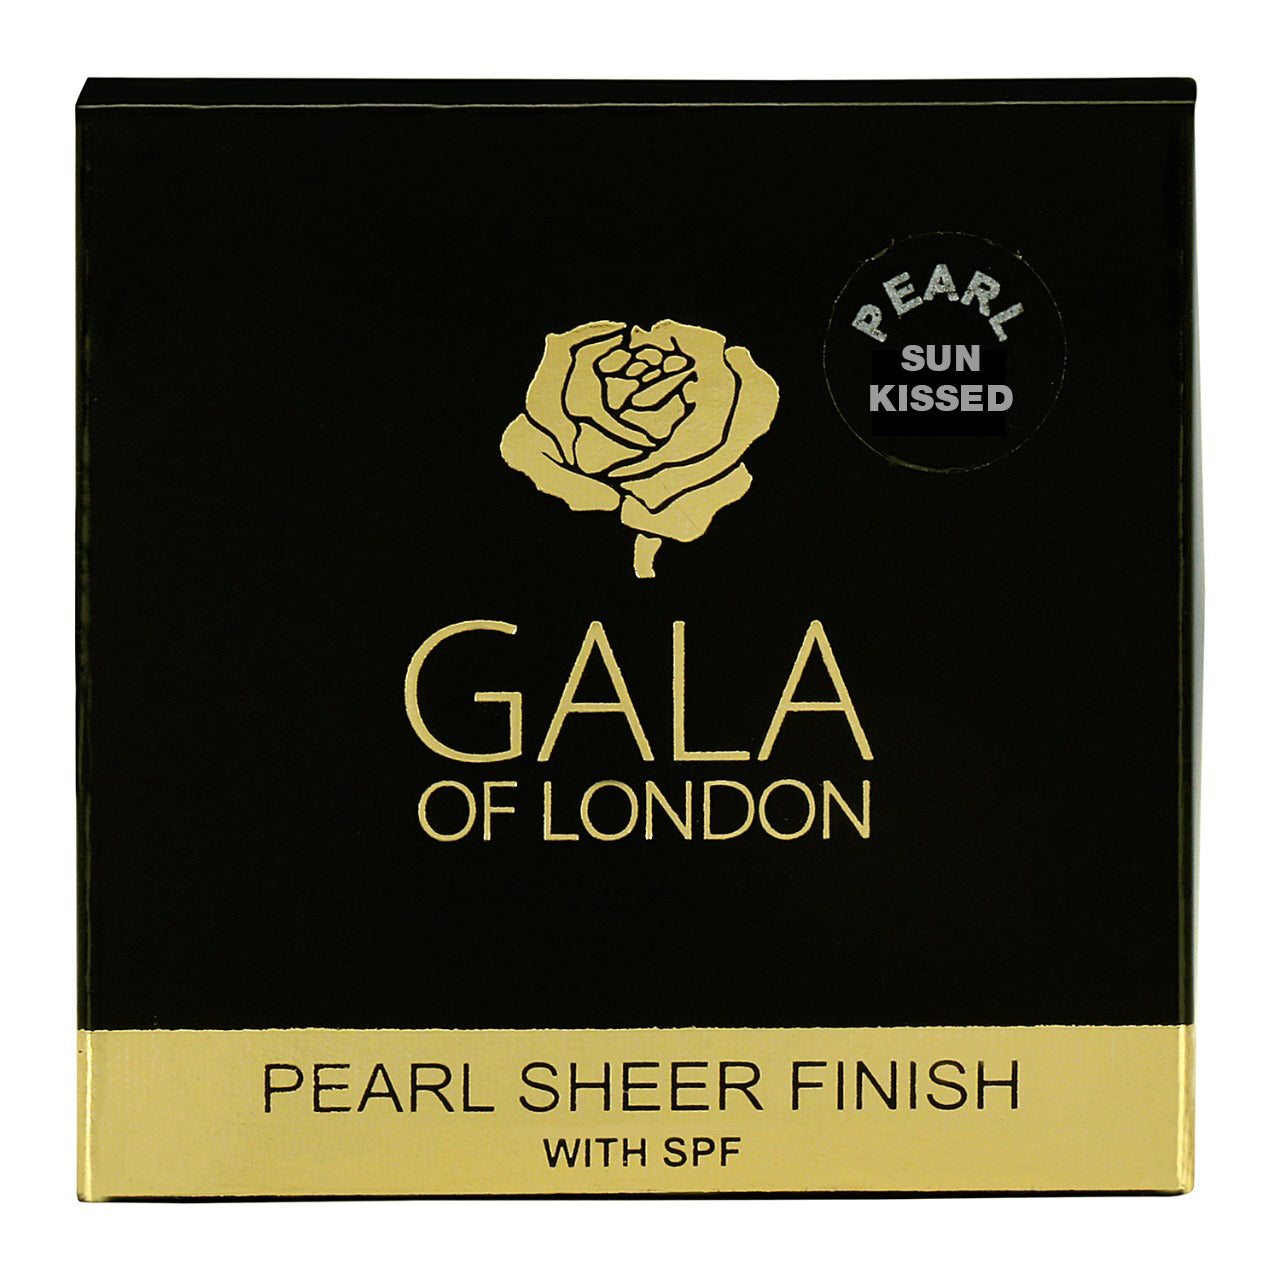 Gala of London Pearl Sheer Finish 12g - Sunkissed